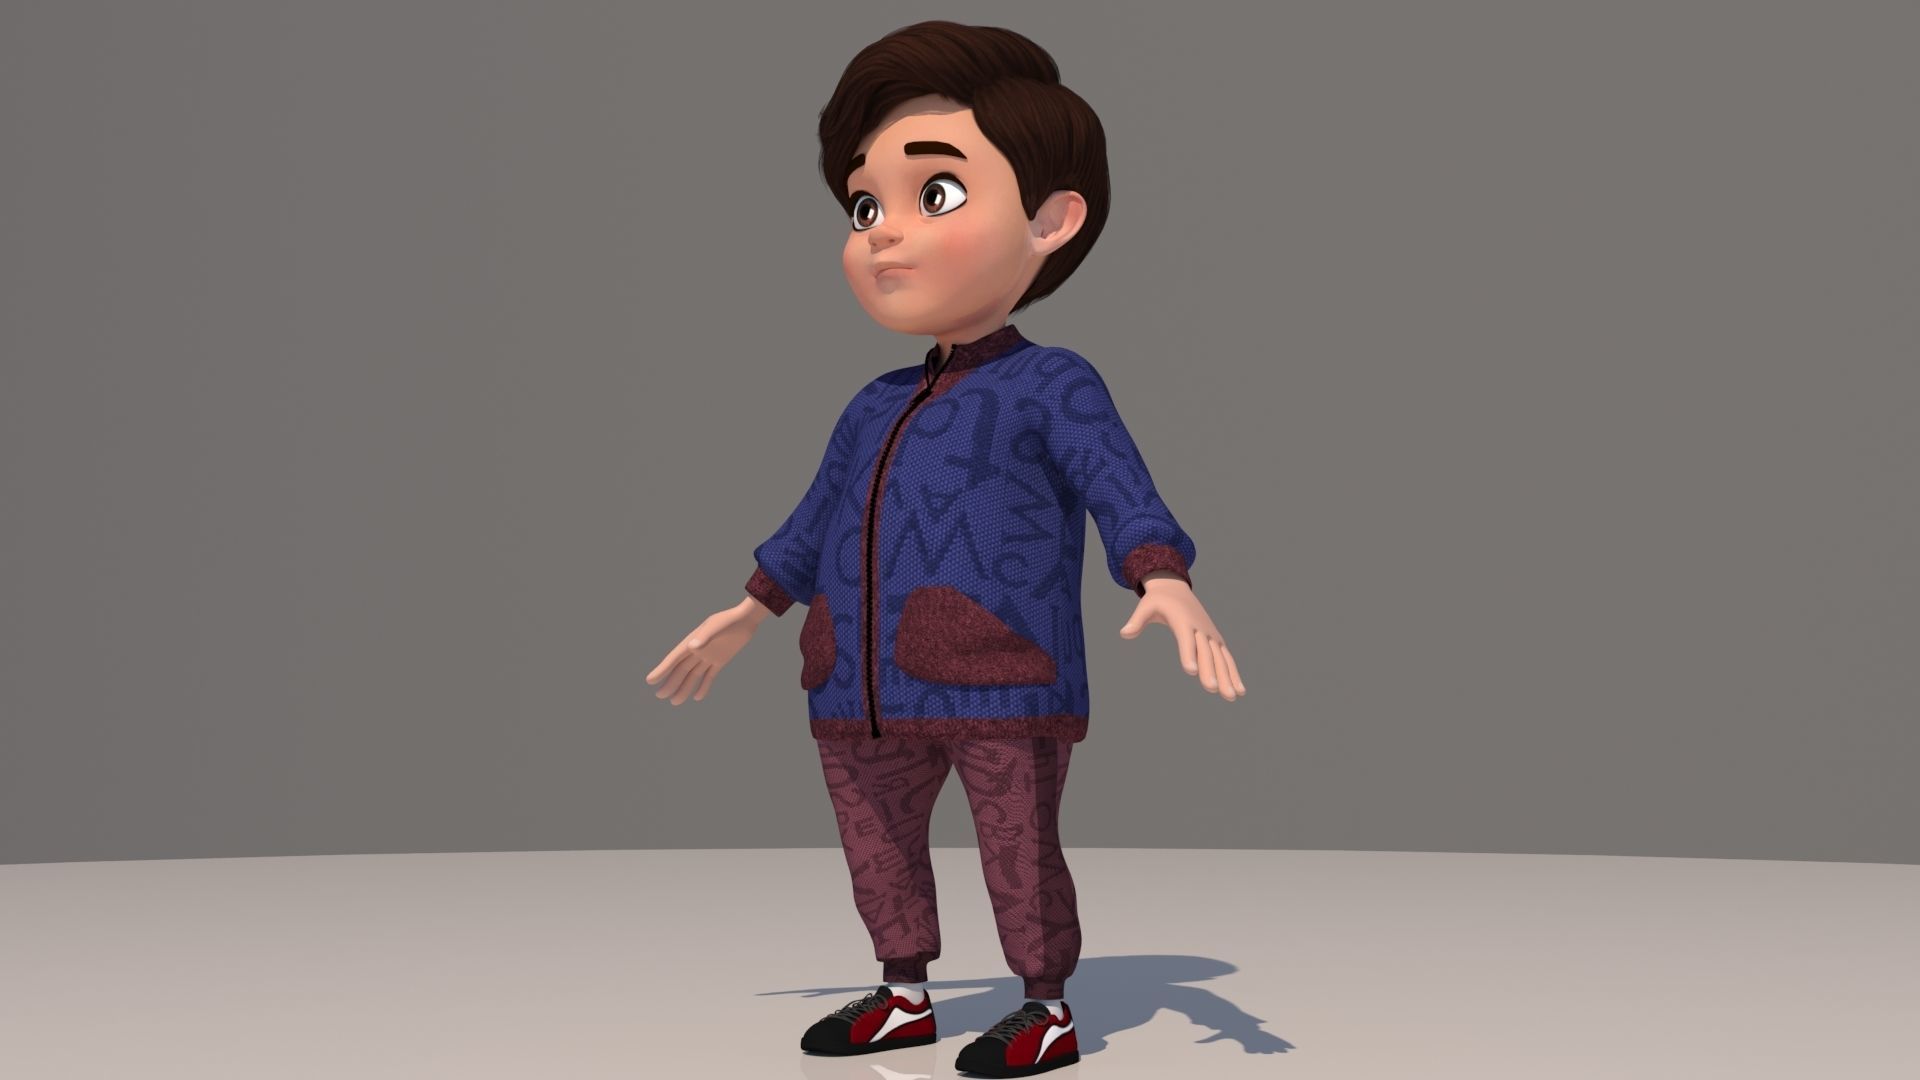 TOON CHARACTER PACK - 21 RIGGED CHAR 3D model - Model 3D Download For Free 9